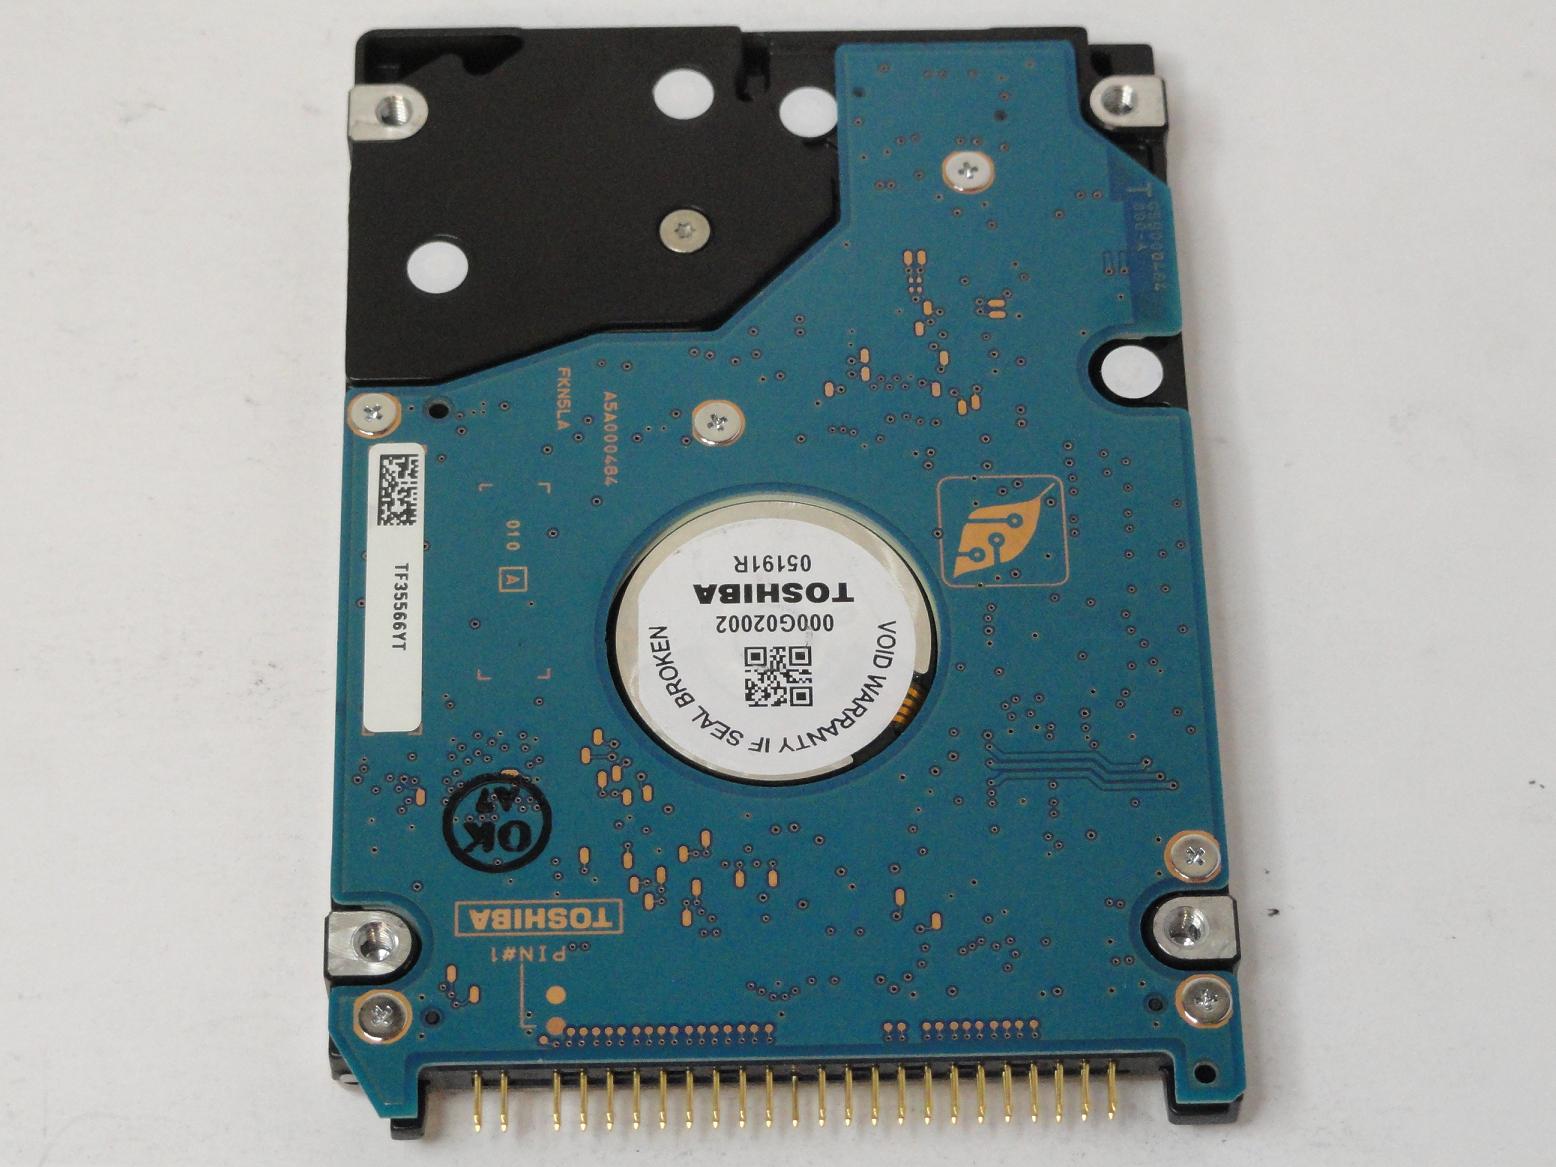 PR14907_HDD2187_Toshiba HP 20GB IDE 4200rpm 2.5in HDD - Image2